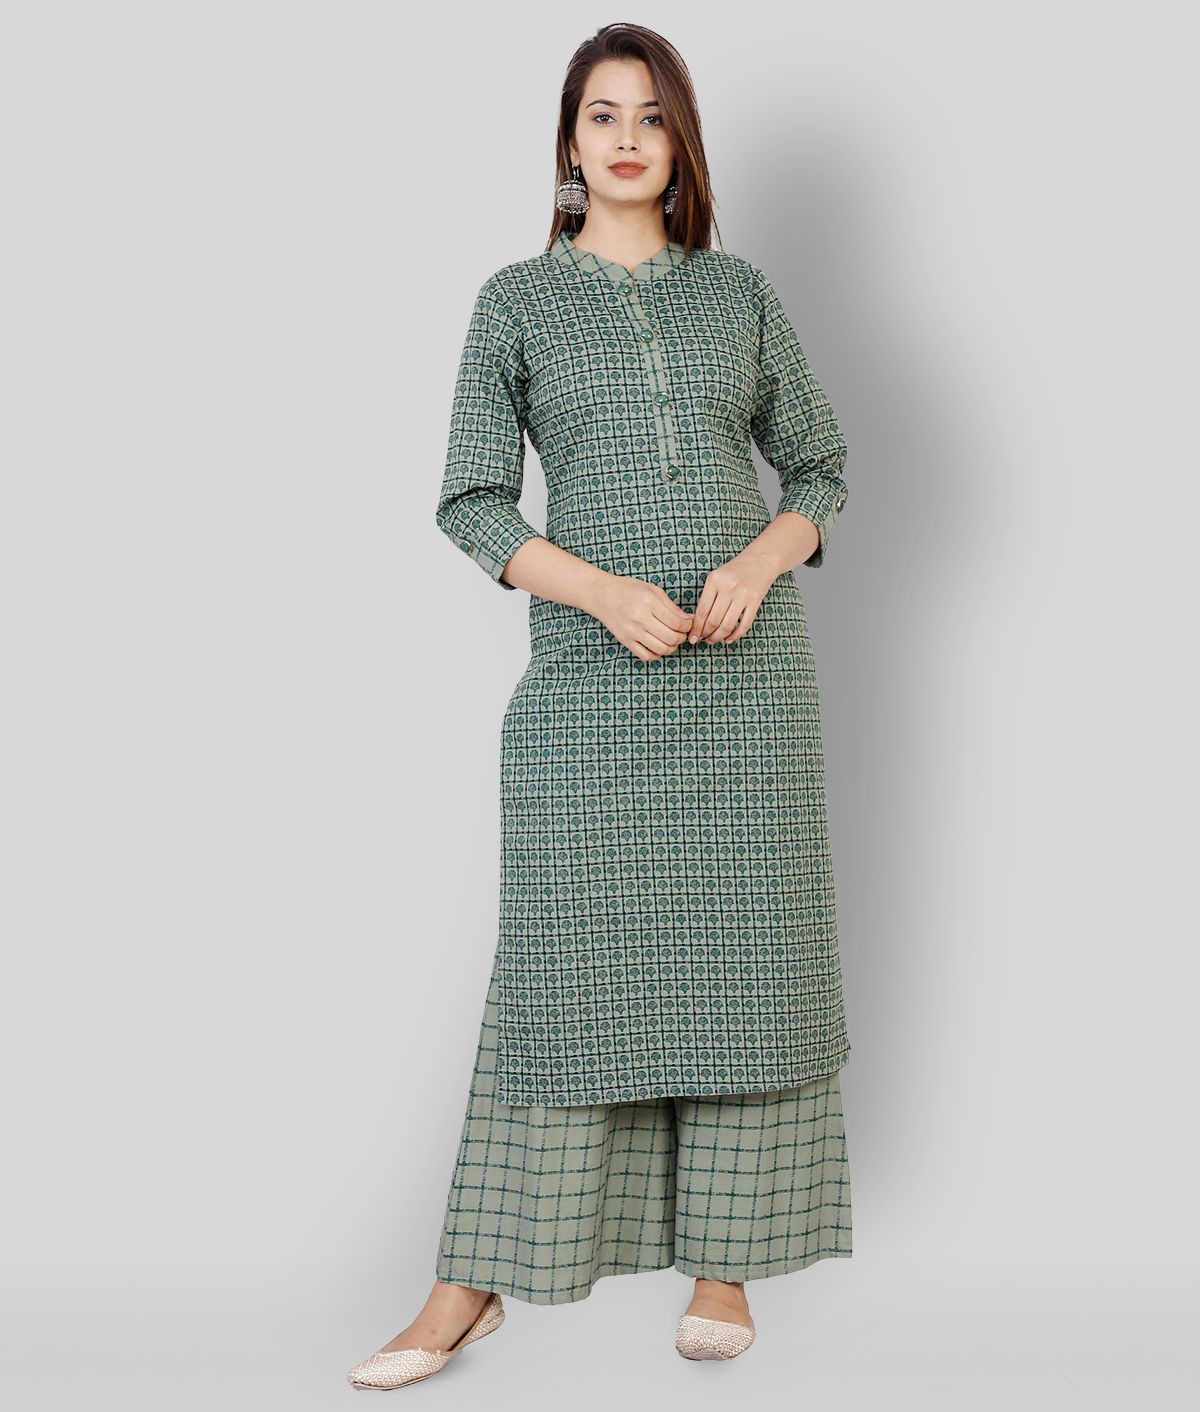     			JC4U - Green Straight Cotton Women's Stitched Salwar Suit ( Pack of 1 )